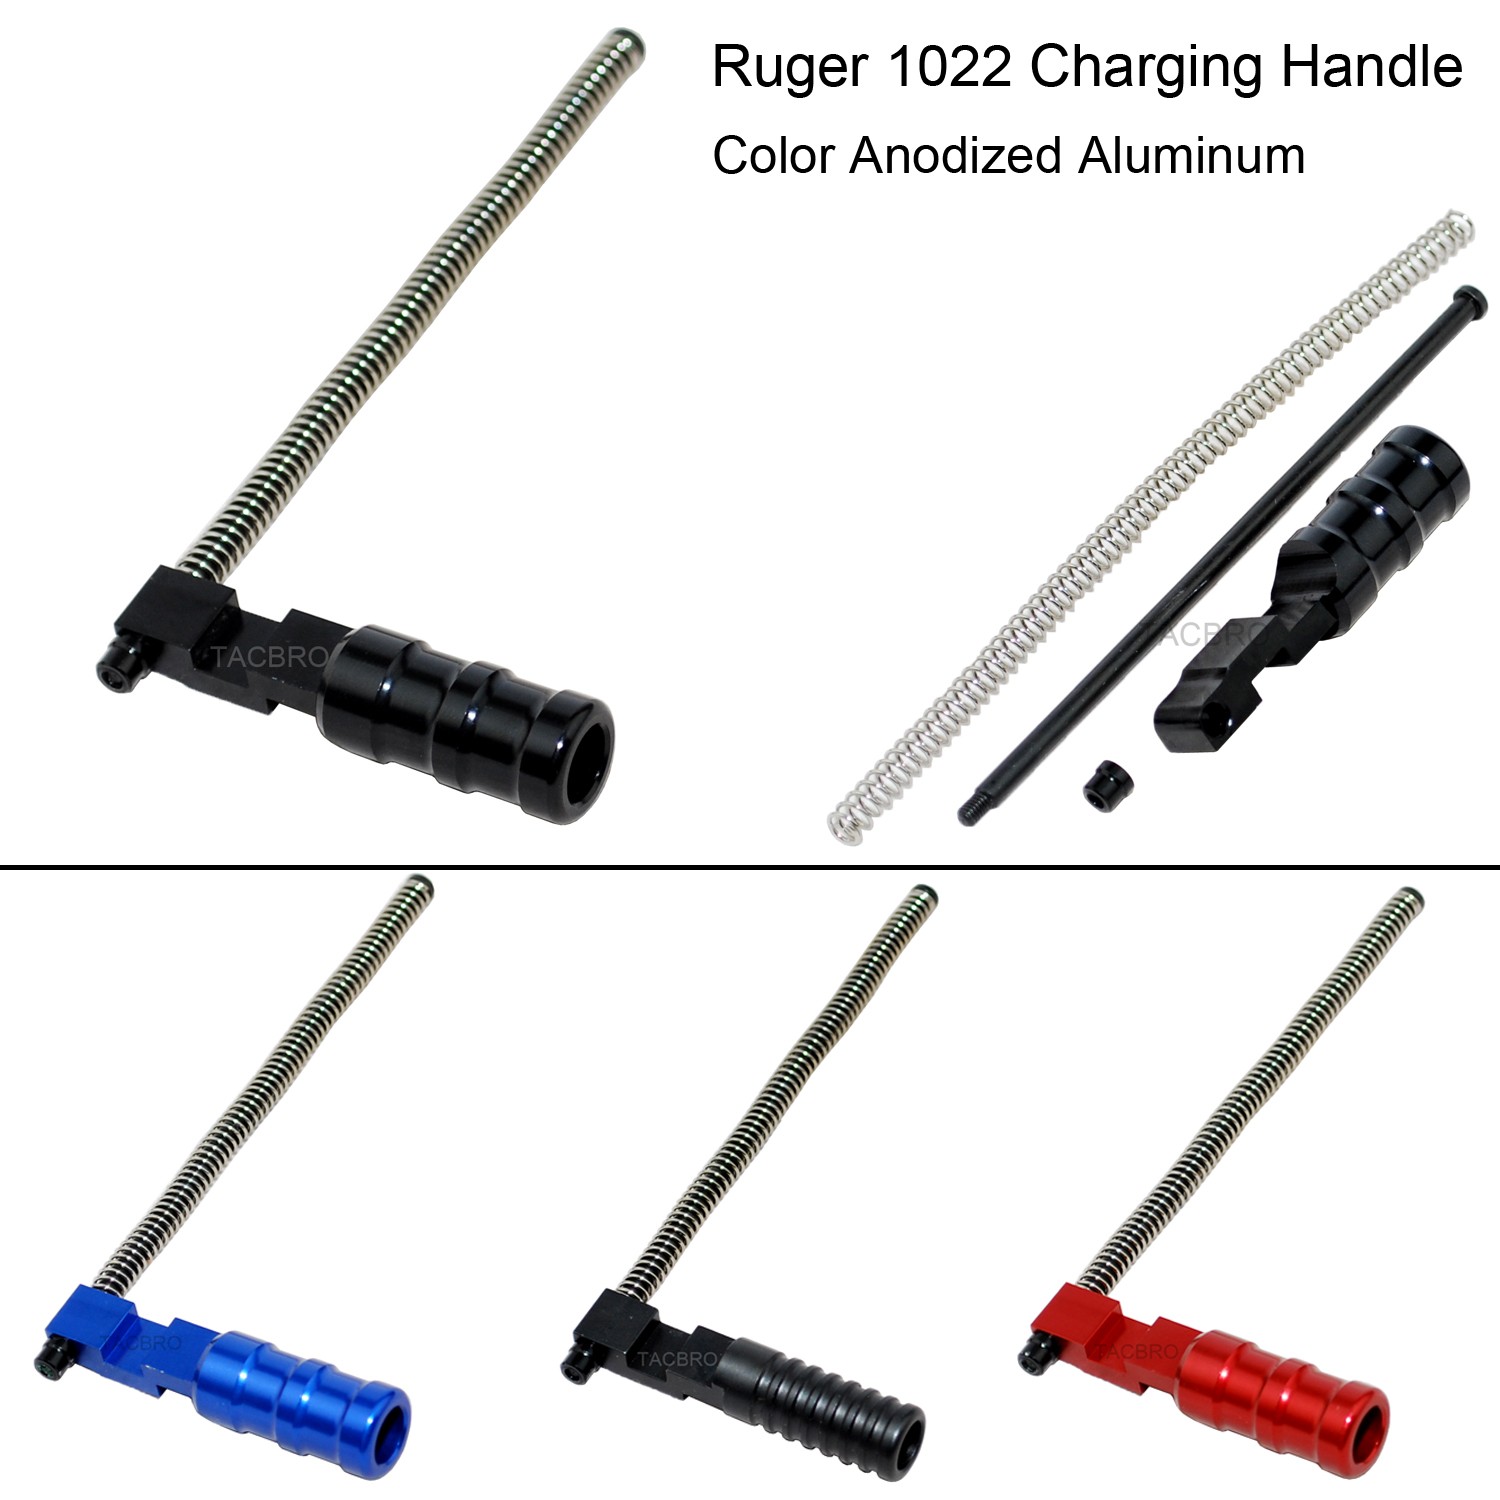 Ruger 1022 10-22 Extended Grooved Round Charging Handle Silver Anodized Aluminum 